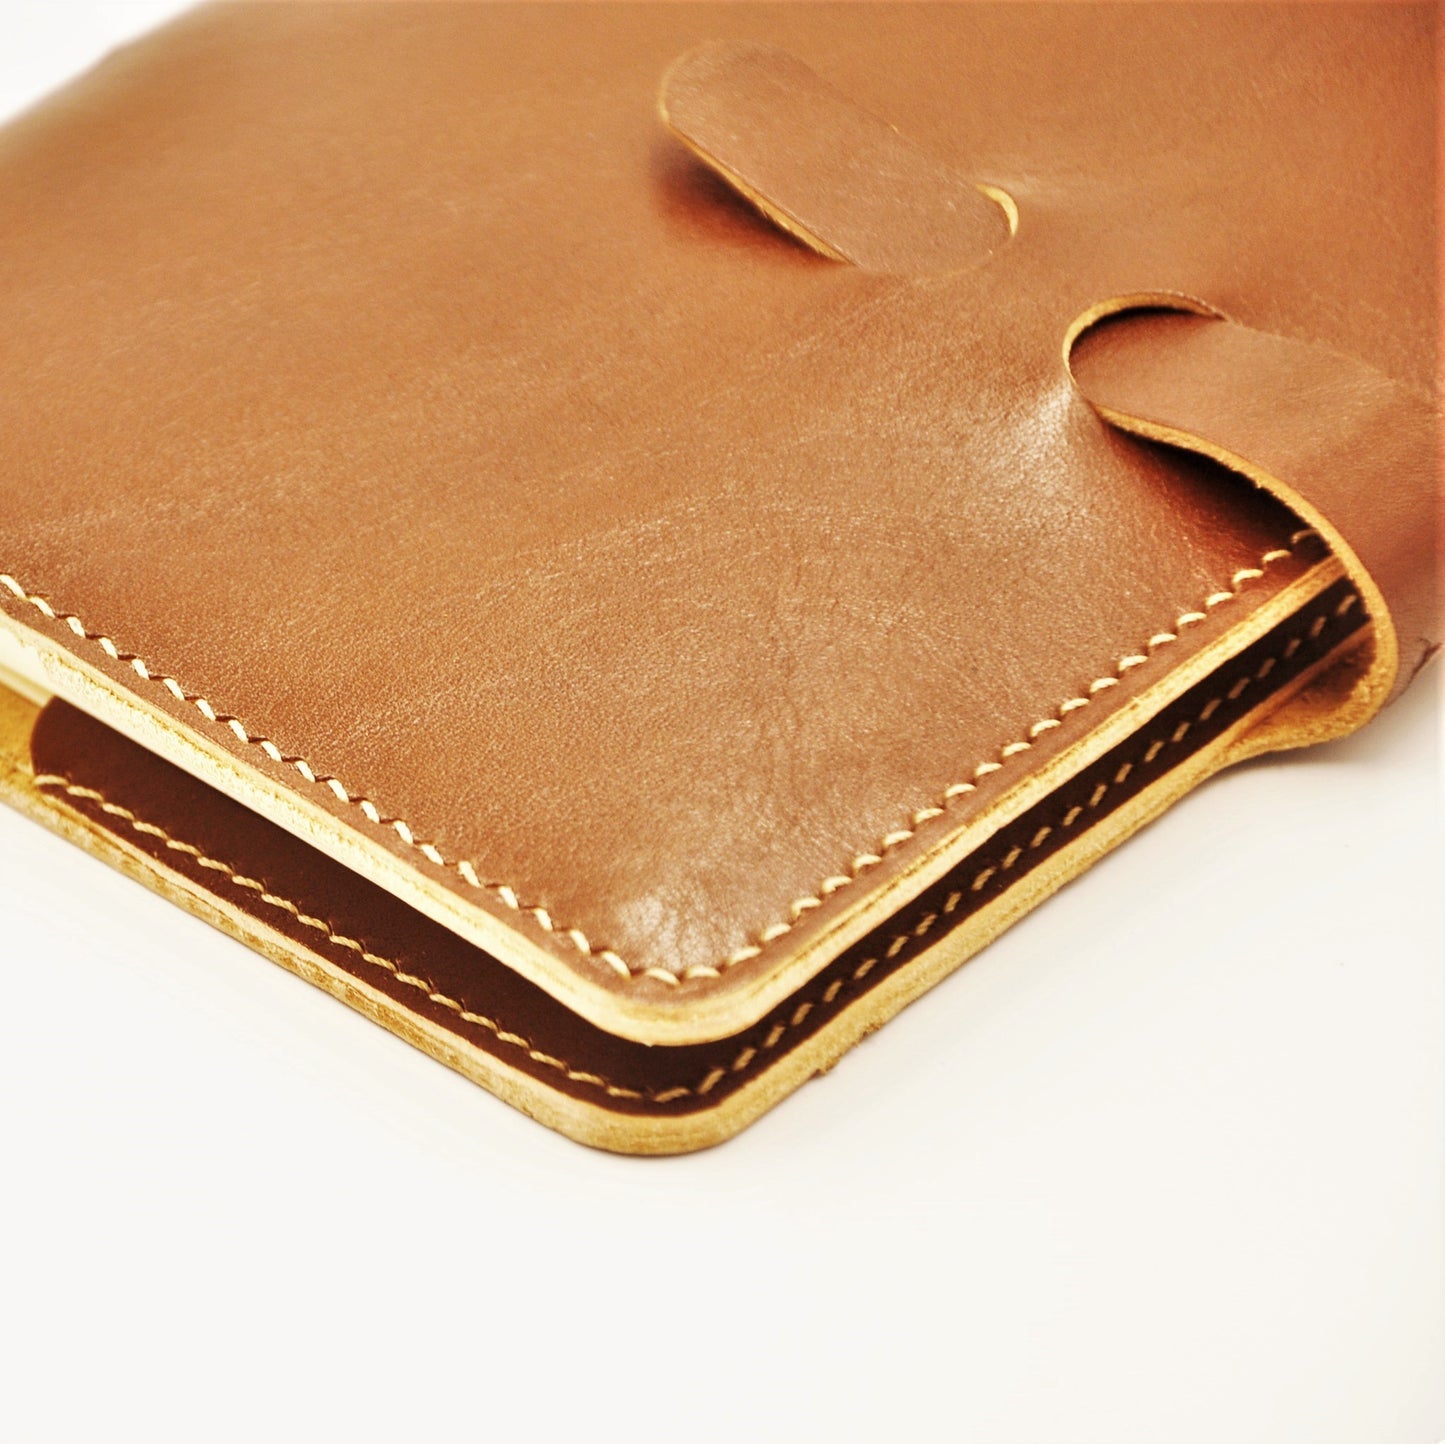 PICCOLO A6-P Premium Traveller's Notebook Sleeve